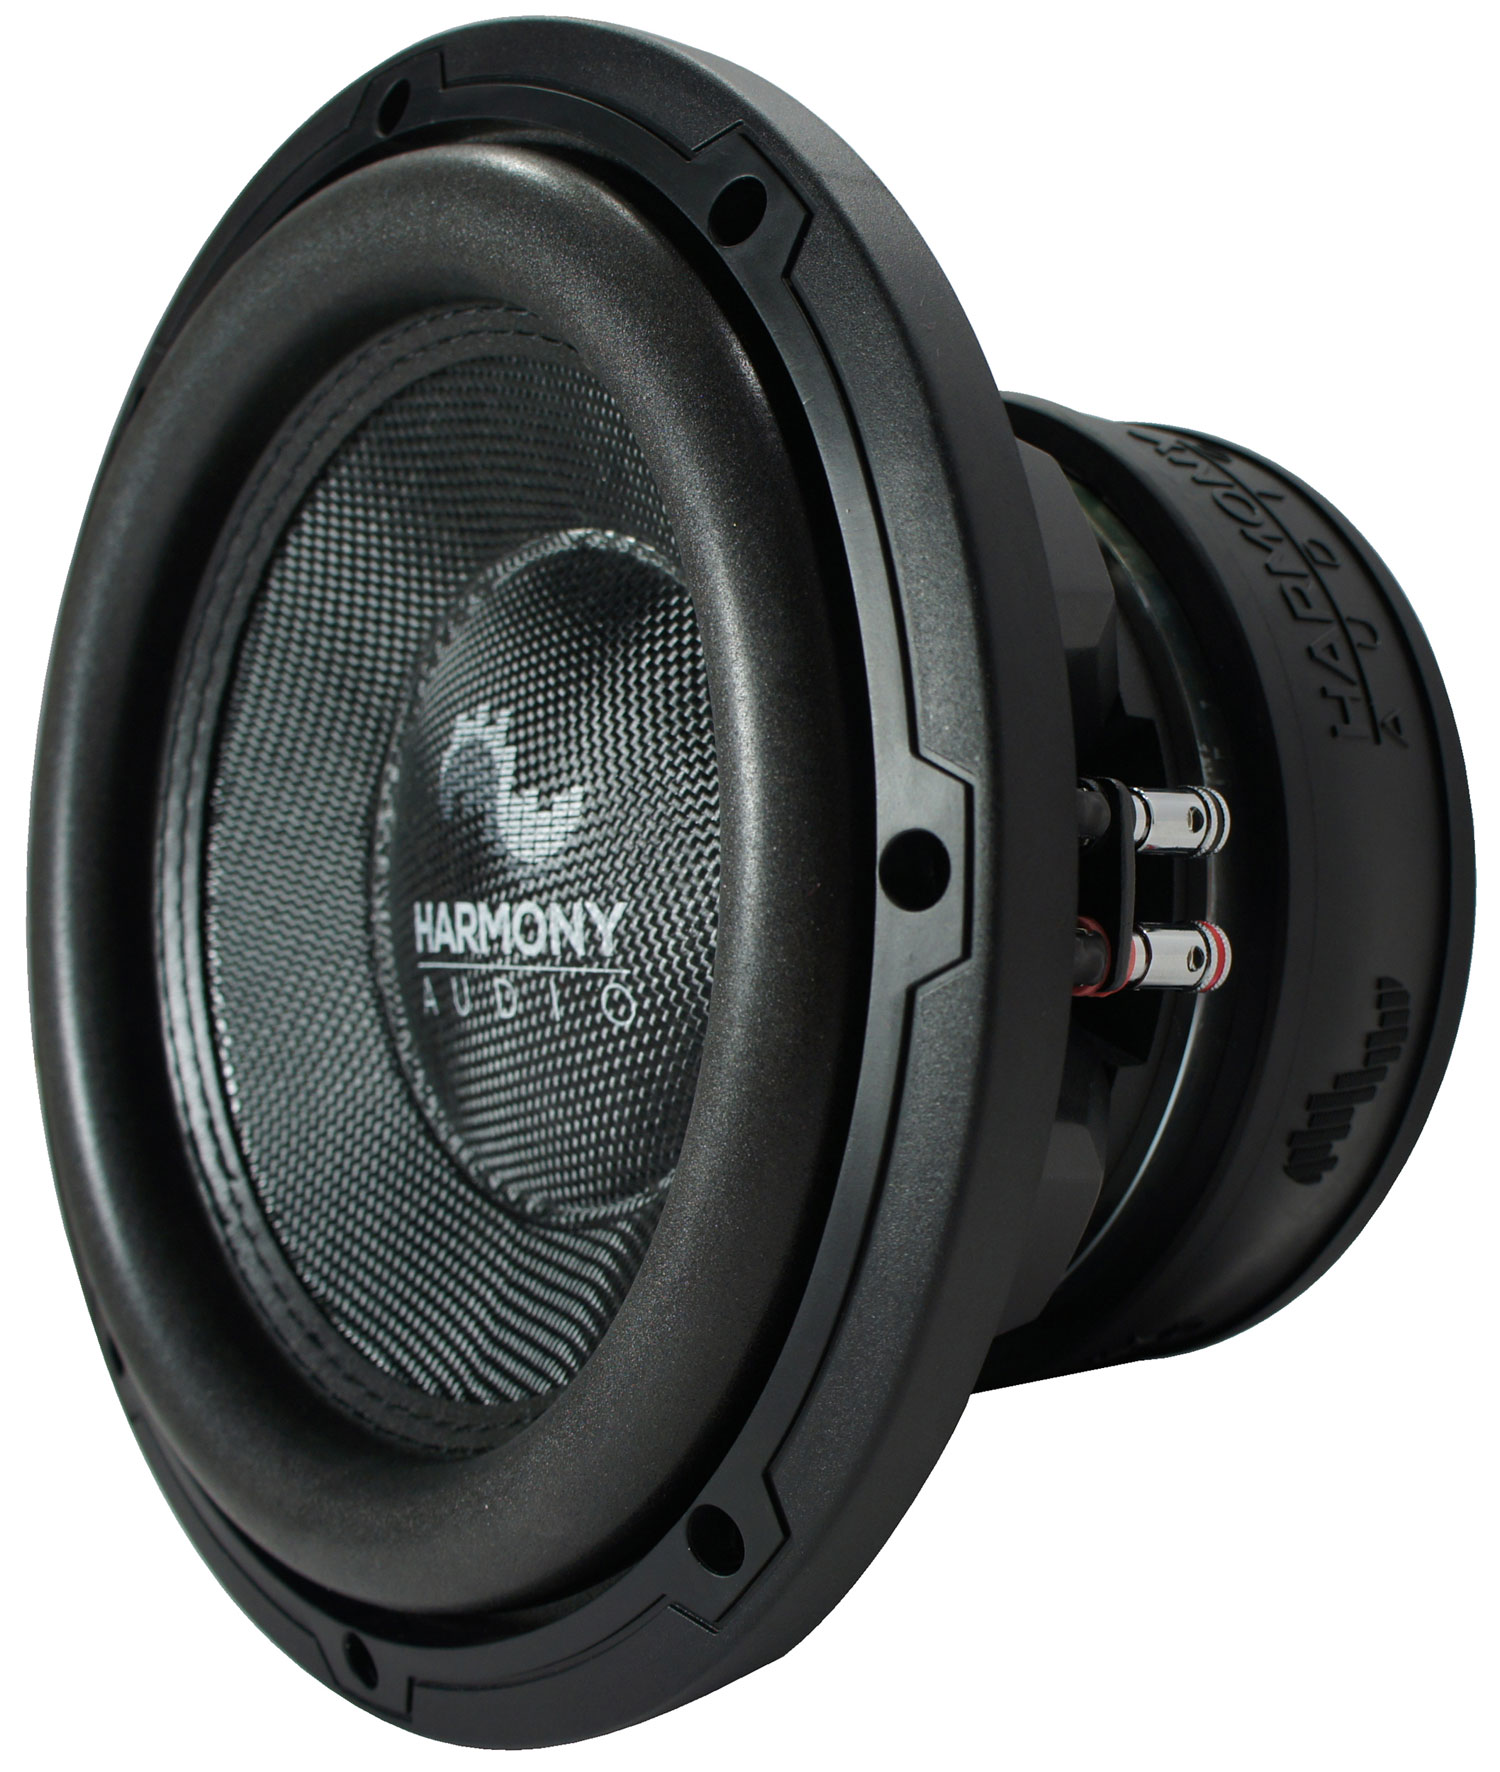 Harmony Audio HA-C102 Car Stereo Competition 10" Sub 2000W Dual 2 Ohm Subwoofer - image 4 of 7